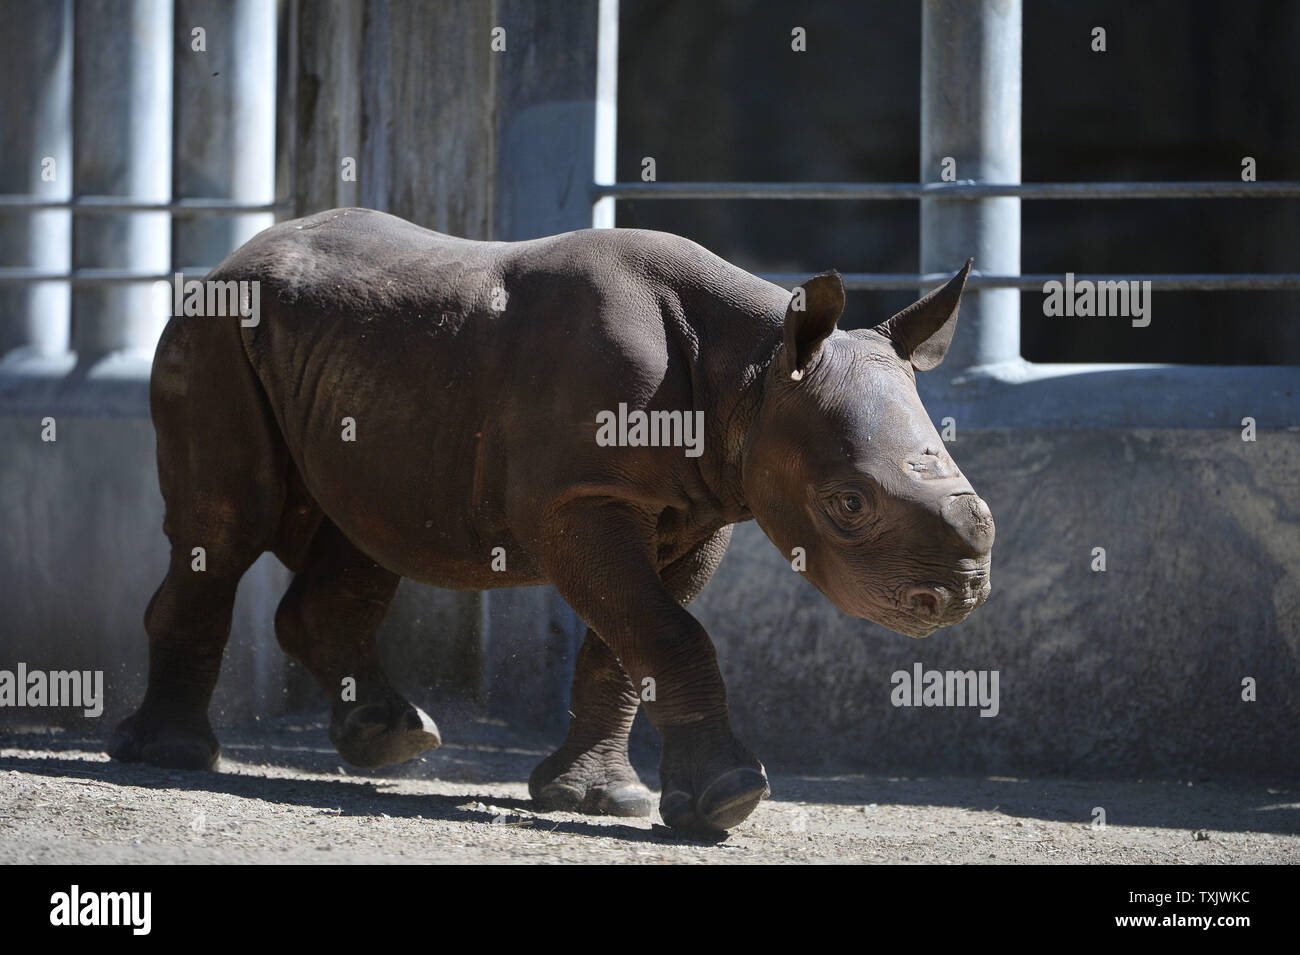 King, a one-month-old eastern black rhinoceros, walks through its habitat at the Lincoln Park Zoo in Chicago on September, 26, 2013. King, who made its public debut on September 17, was born on August 26 and is the first of the species born at the zoo since 1989. The eastern black rhinoceros is an endangered species with only 5,000 surviving in the wild.    UPI/Brian Kersey Stock Photo